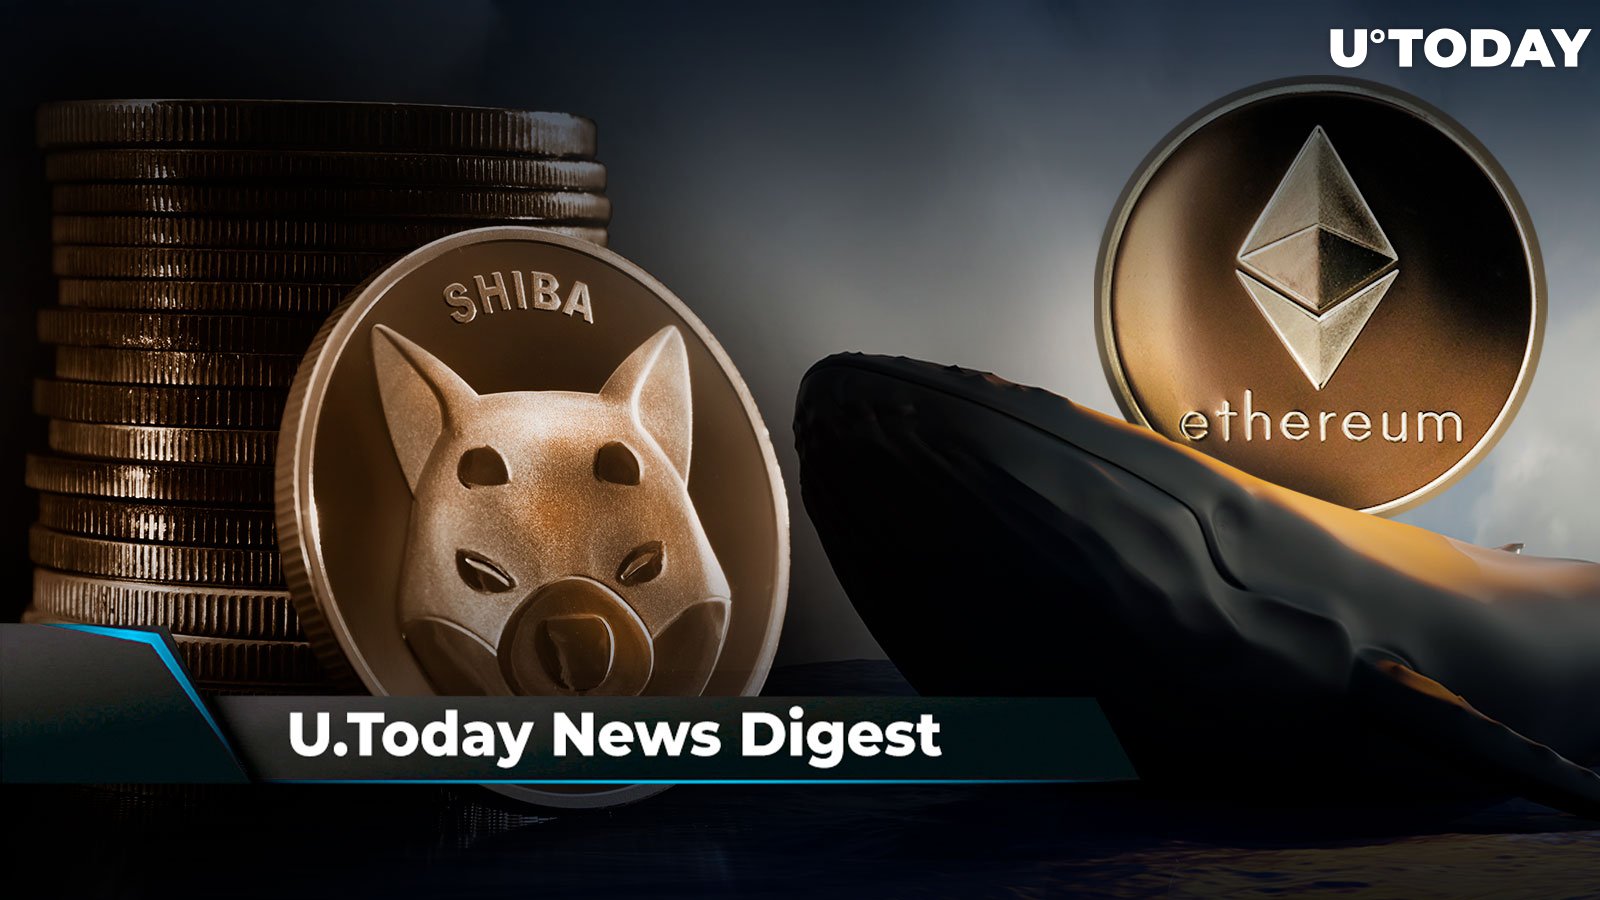 SHIB Completes H&S Pattern, Ripple Allowed to Authenticate Videos of SEC Officials, Ancient Ethereum Whale Shifts 145,000 ETH: Crypto News Digest by U.Today